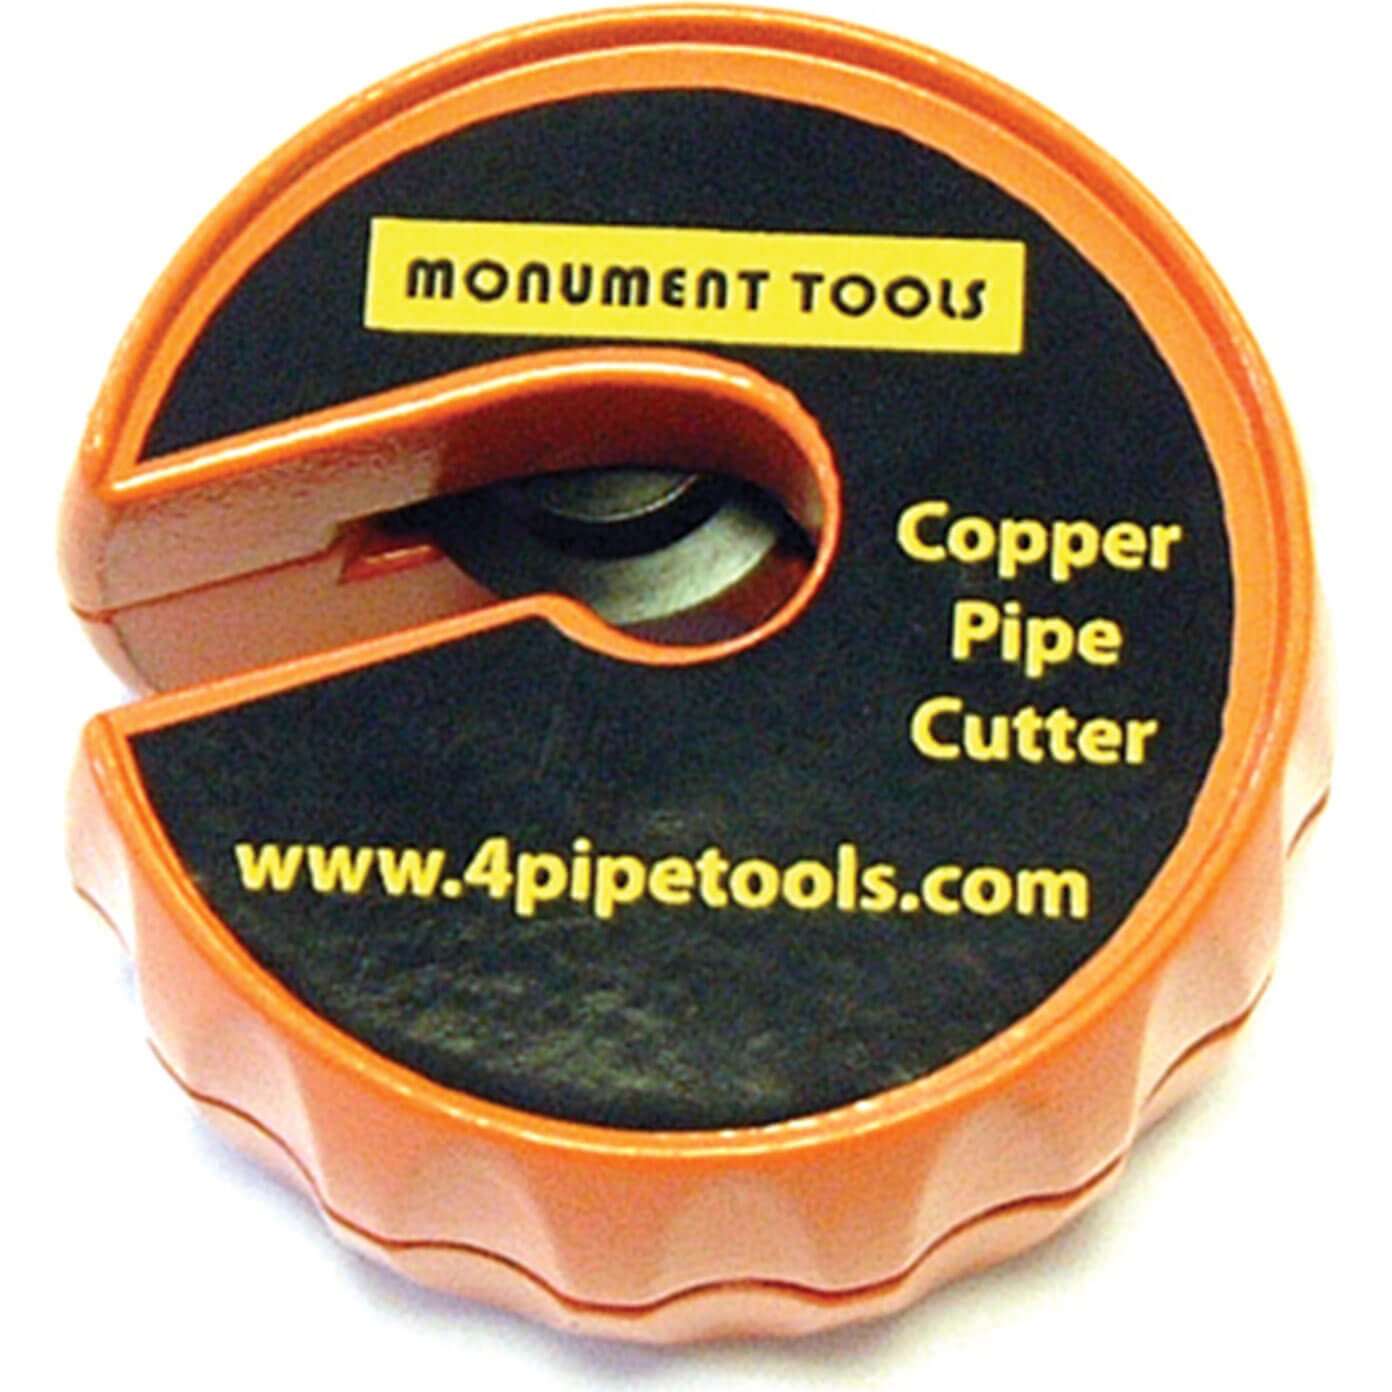 Photo of Monument Trade Copper Pipe Cutter 6mm